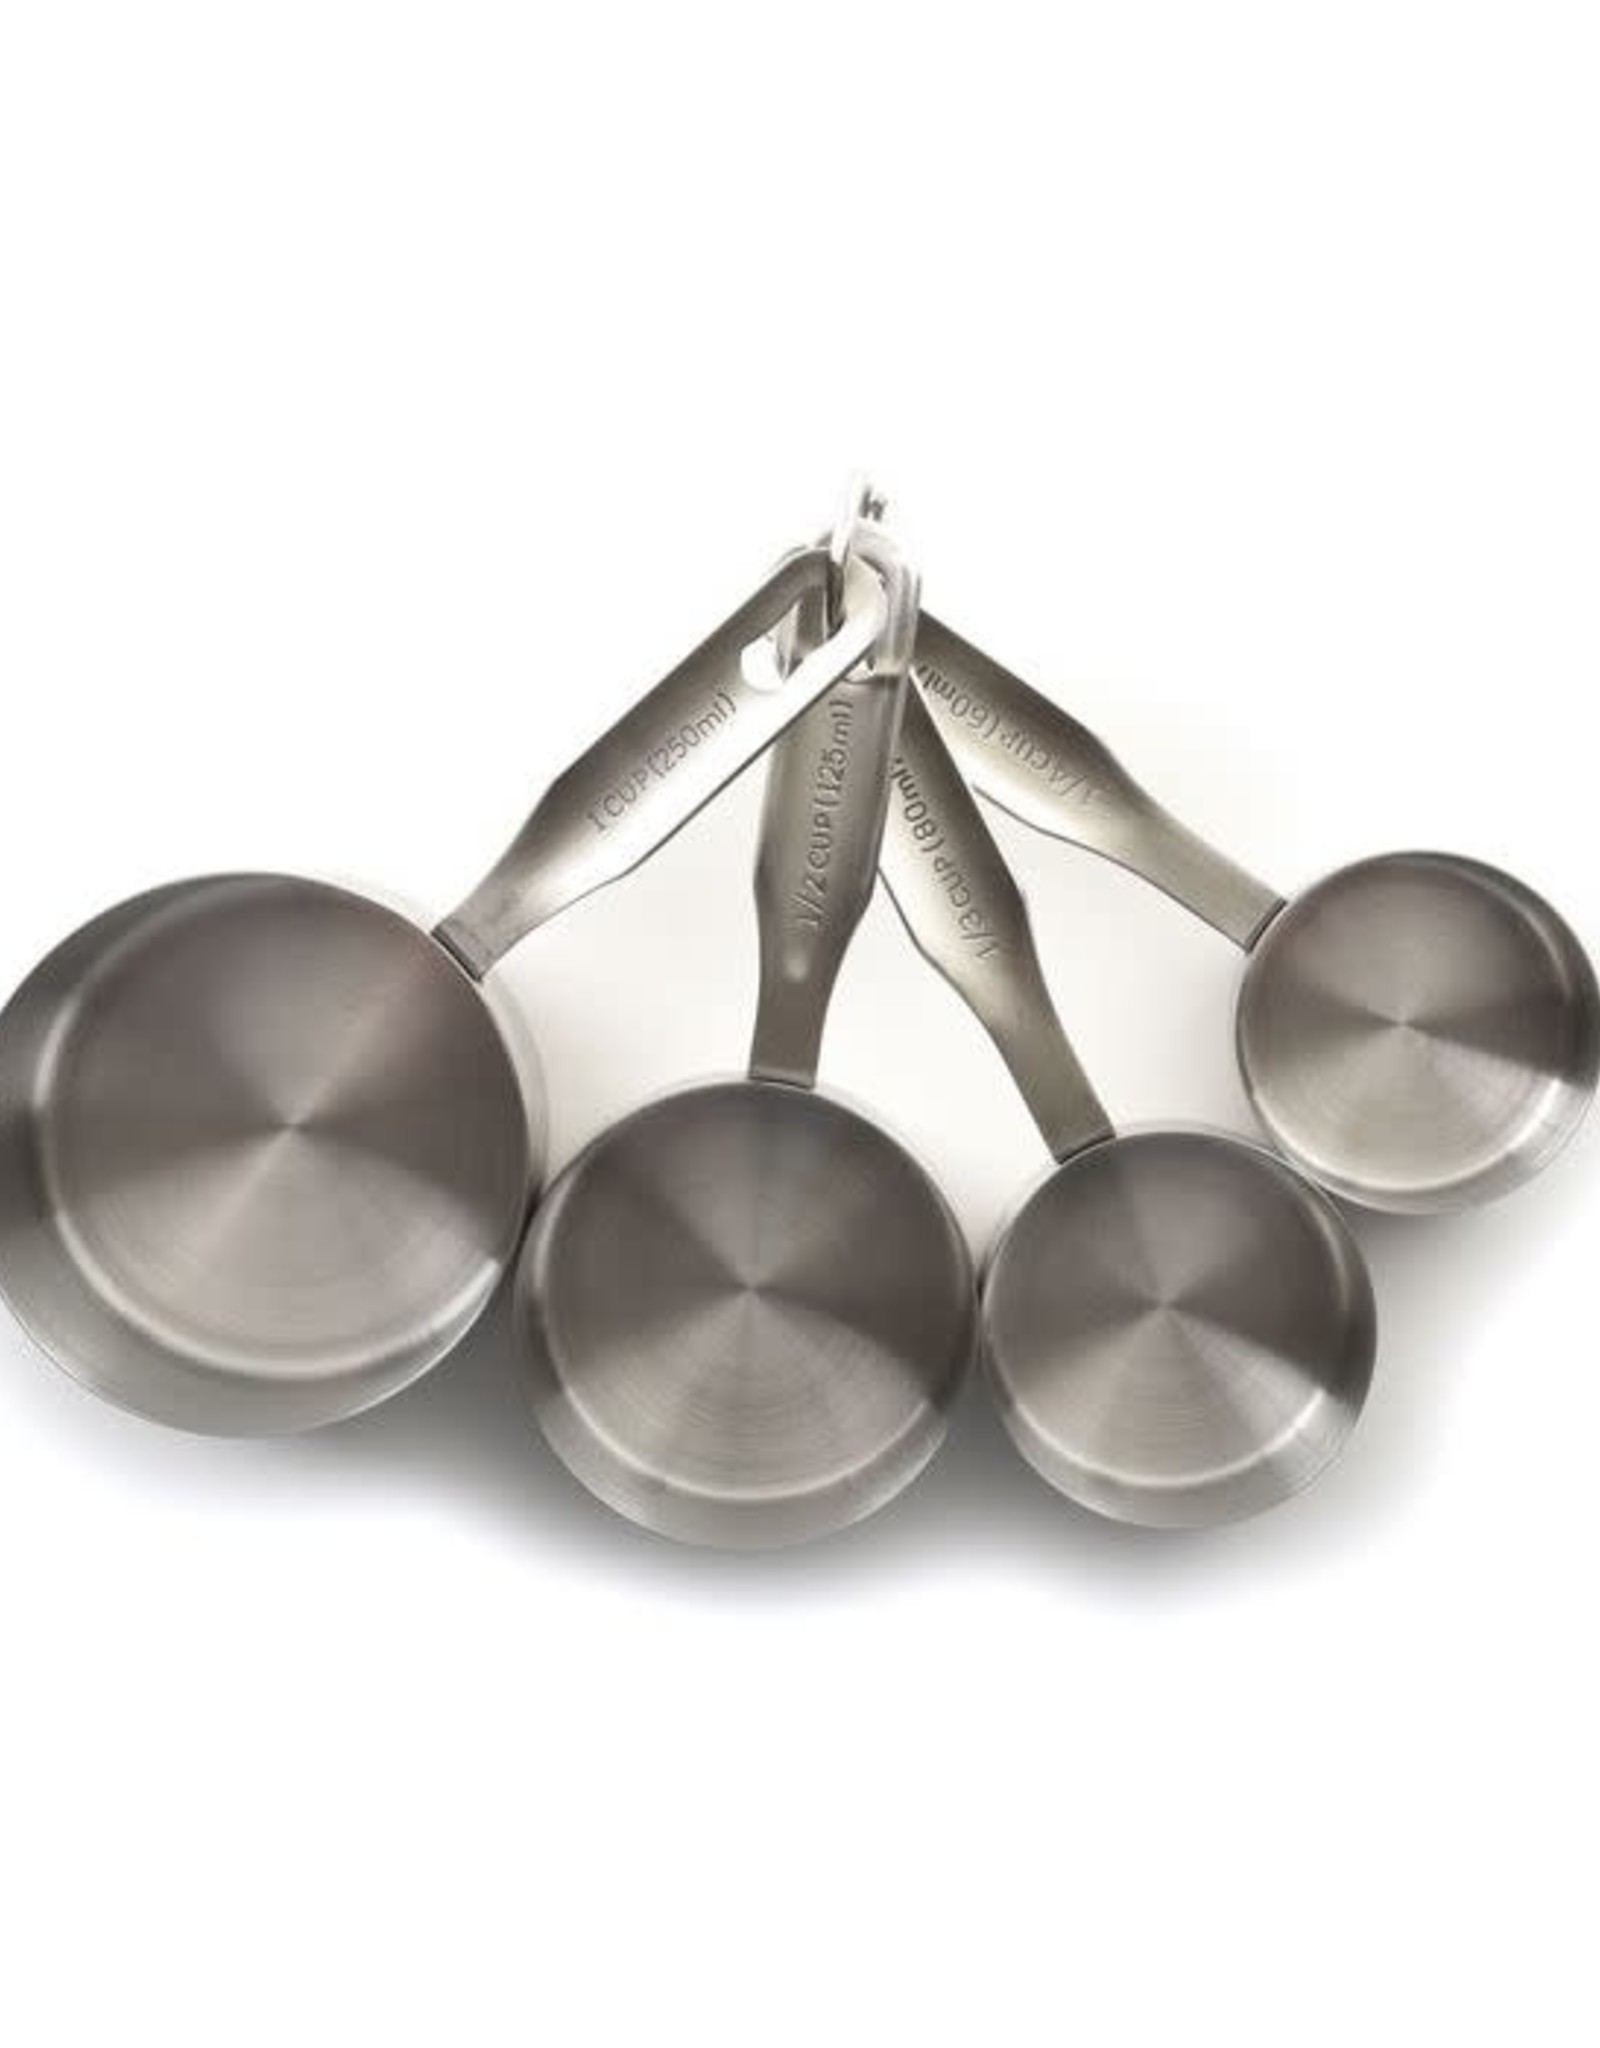 Measuring Cups (Stainless Steel), set of 4